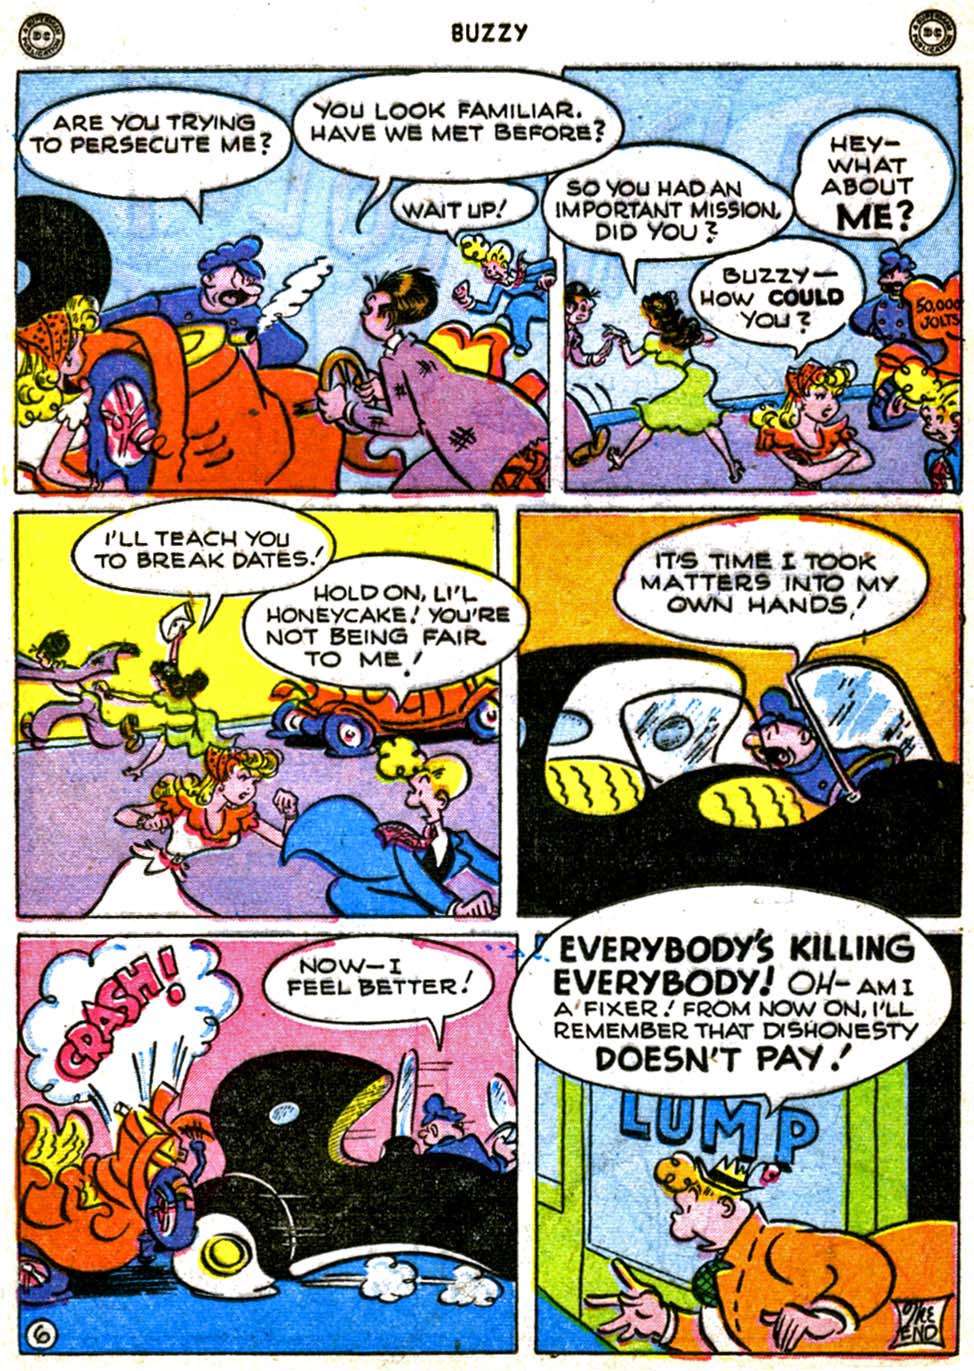 Read online Buzzy comic -  Issue #11 - 17